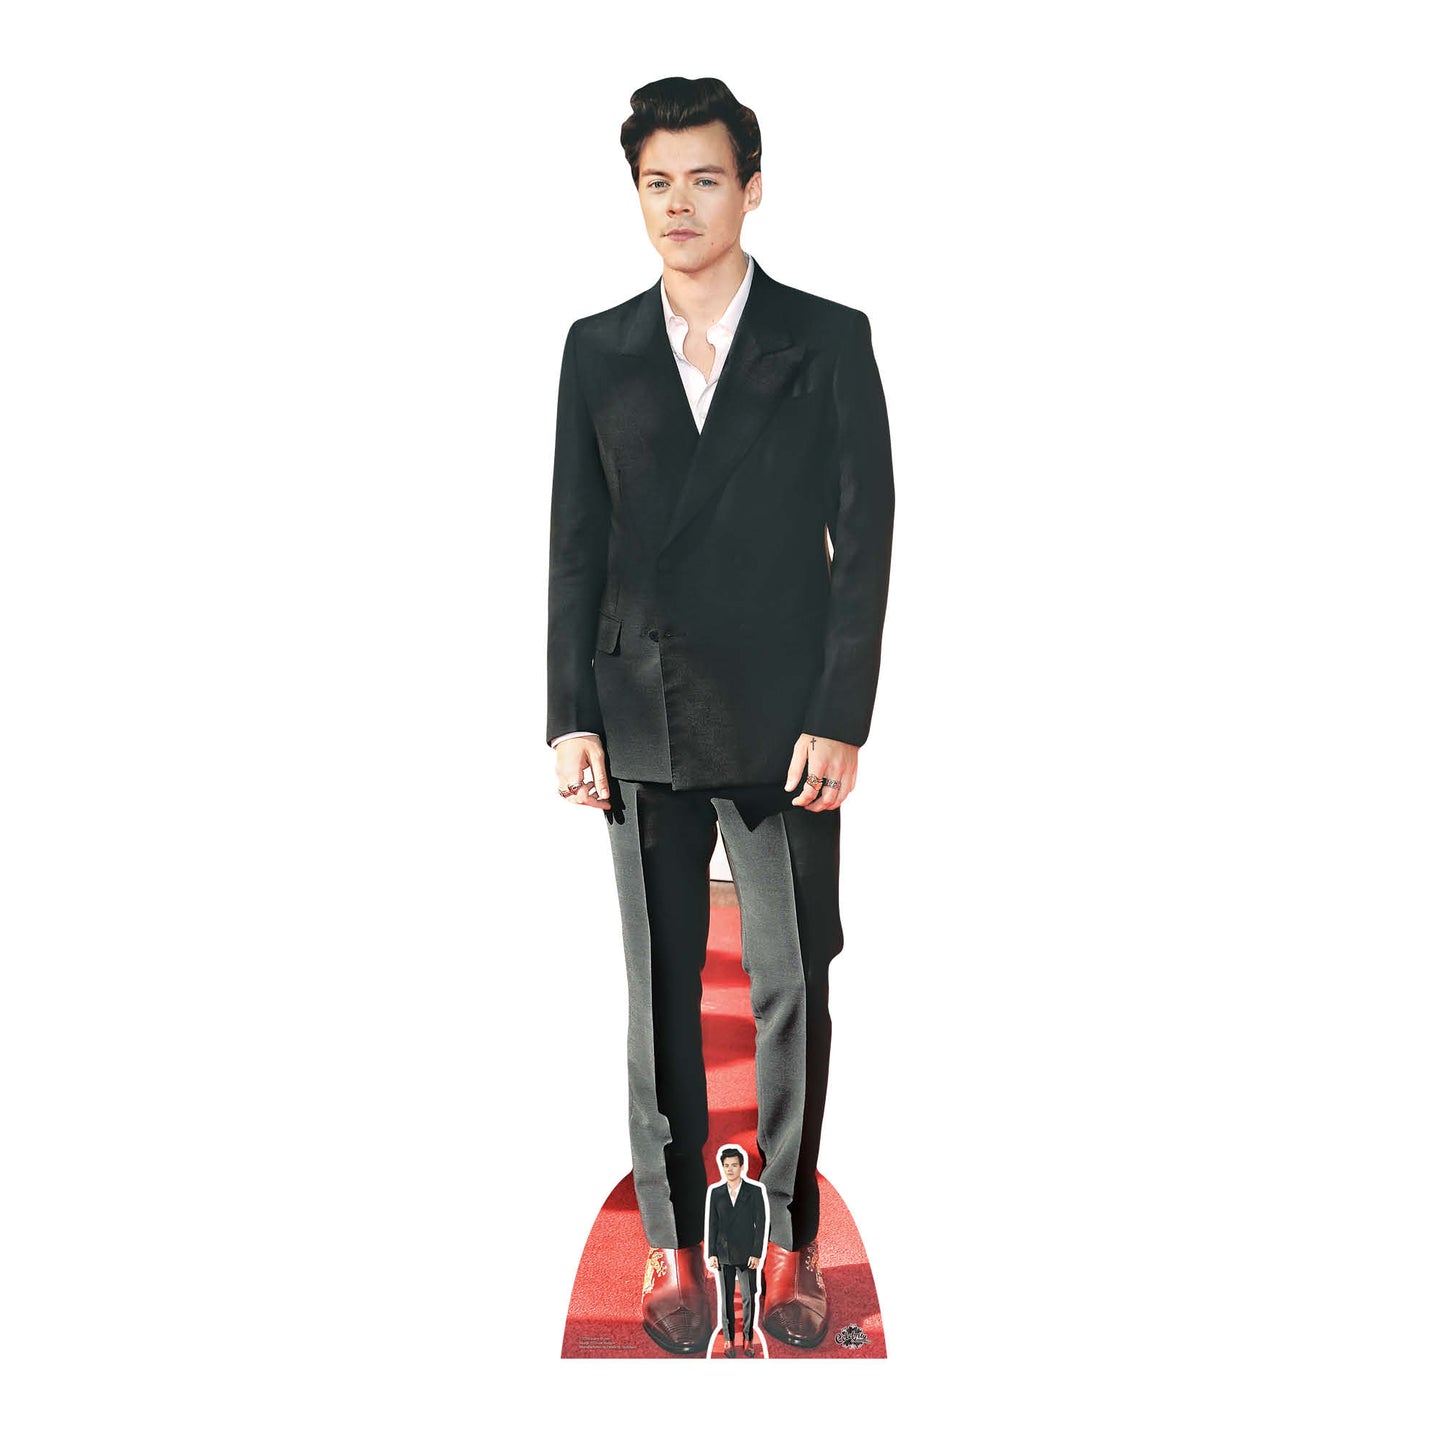 Harry Styles Red Shoes Cardboard Cutout